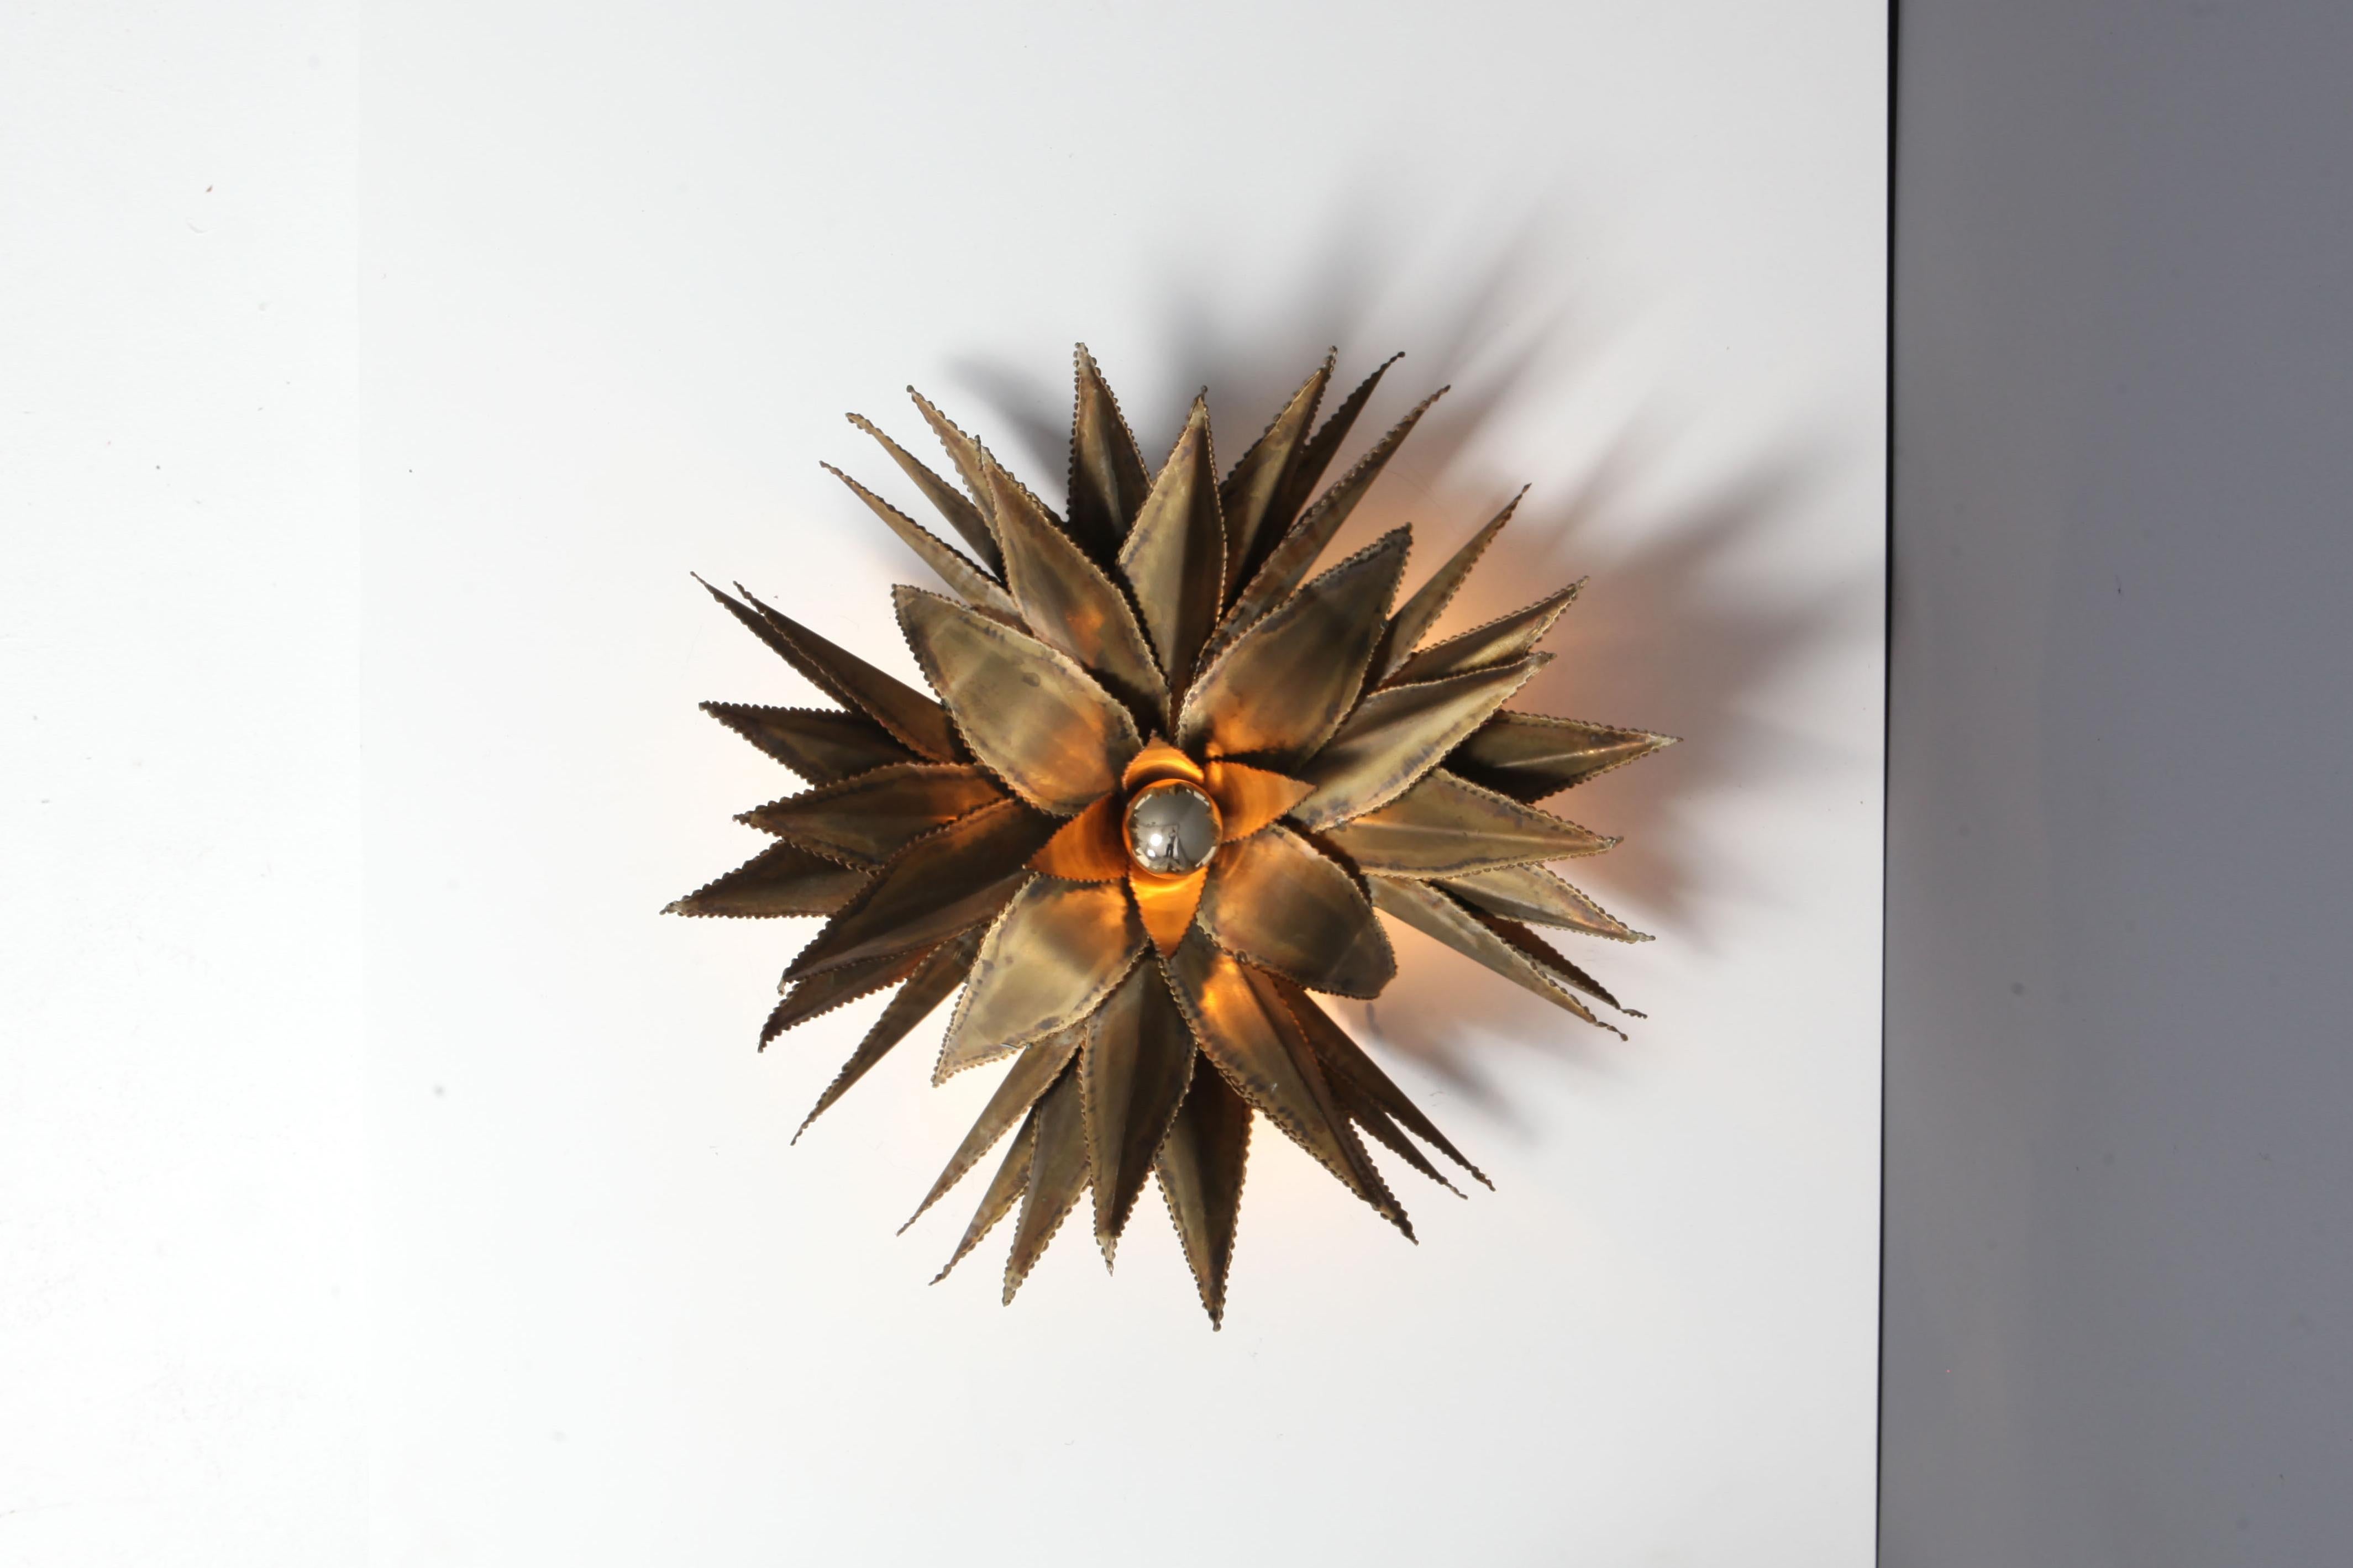 Hollywood Regency handmade fixtures by Maison Jansen, France, 1970s.
Brass star shaped palm tree wall light, custom made for a Belgian hotel in the 1970s. Priced Per piece. 

Throughout the firm's history, it employed a traditional style drawing